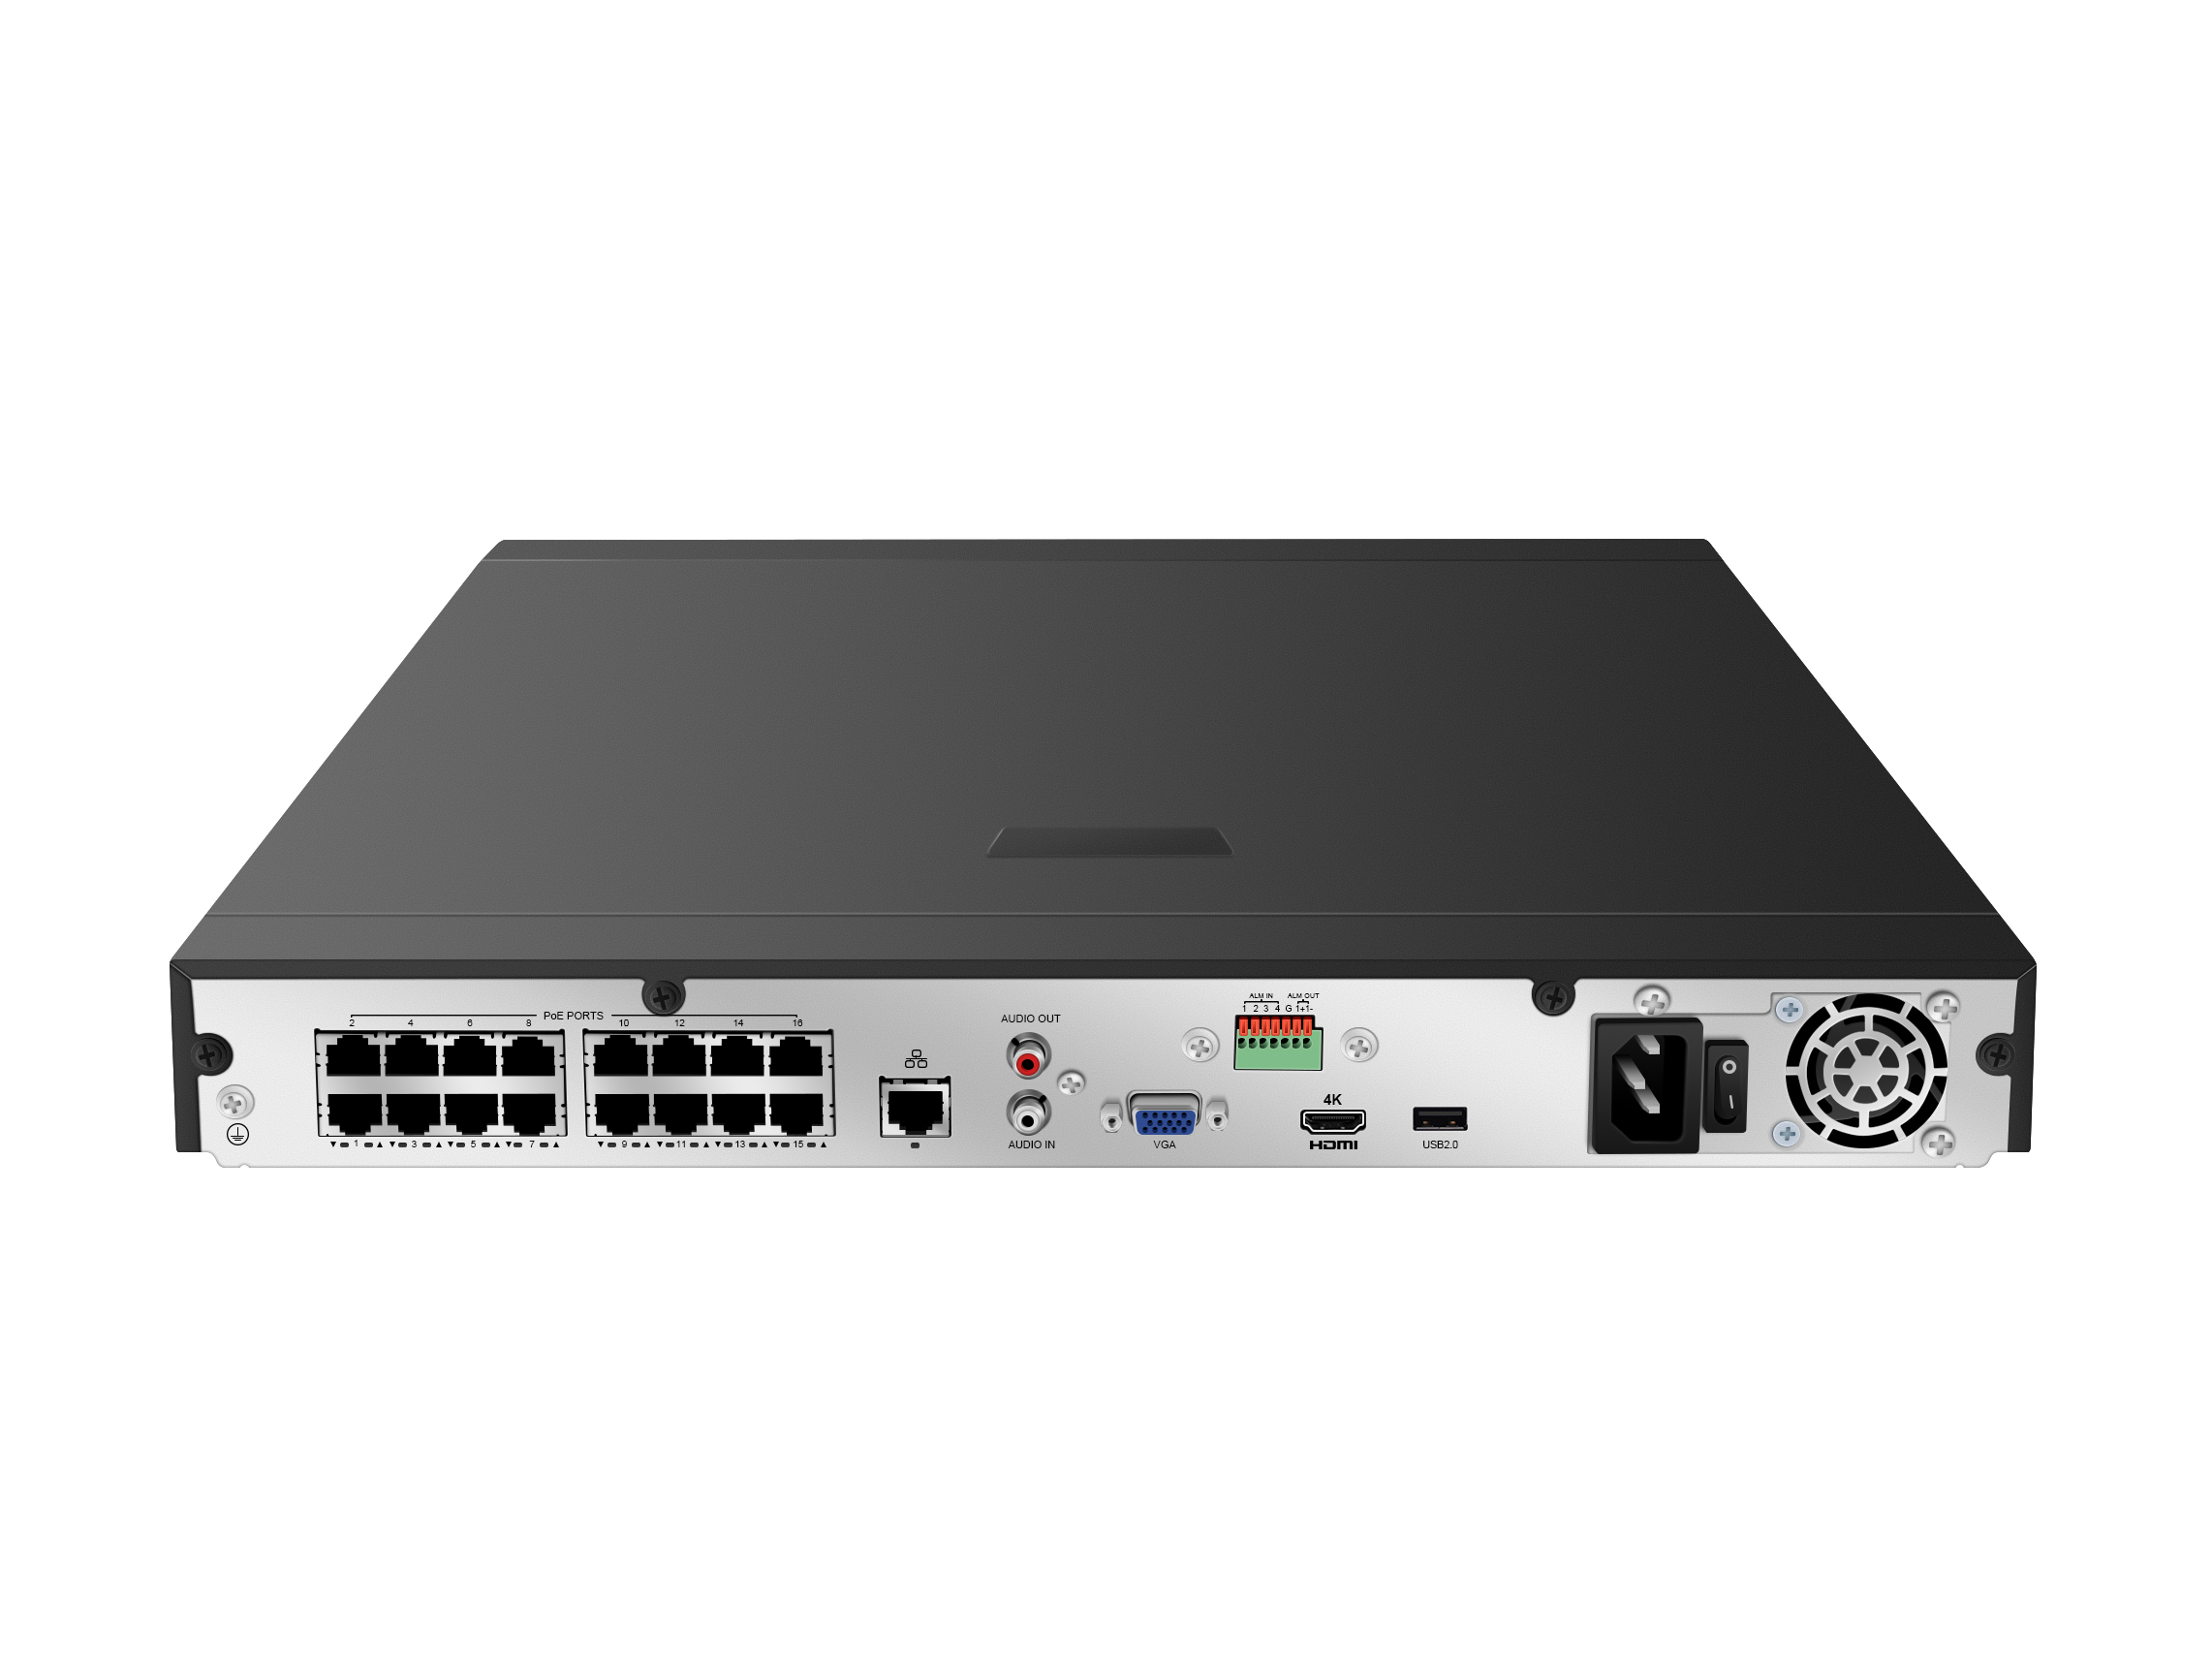 Microseven 4k 16 Channel 16 Port PoE H.265 Network Video Recorder NVR for Security Camera (16CH 1080P/3MP/4MP/5MP/6MP/4K) Supports up to 16 x 8-Megapixel IP Cameras, Max. 10TB HDD 2 x SATA(Not Included) 1 VGA, 1 HDMI, 16 PoE Ports